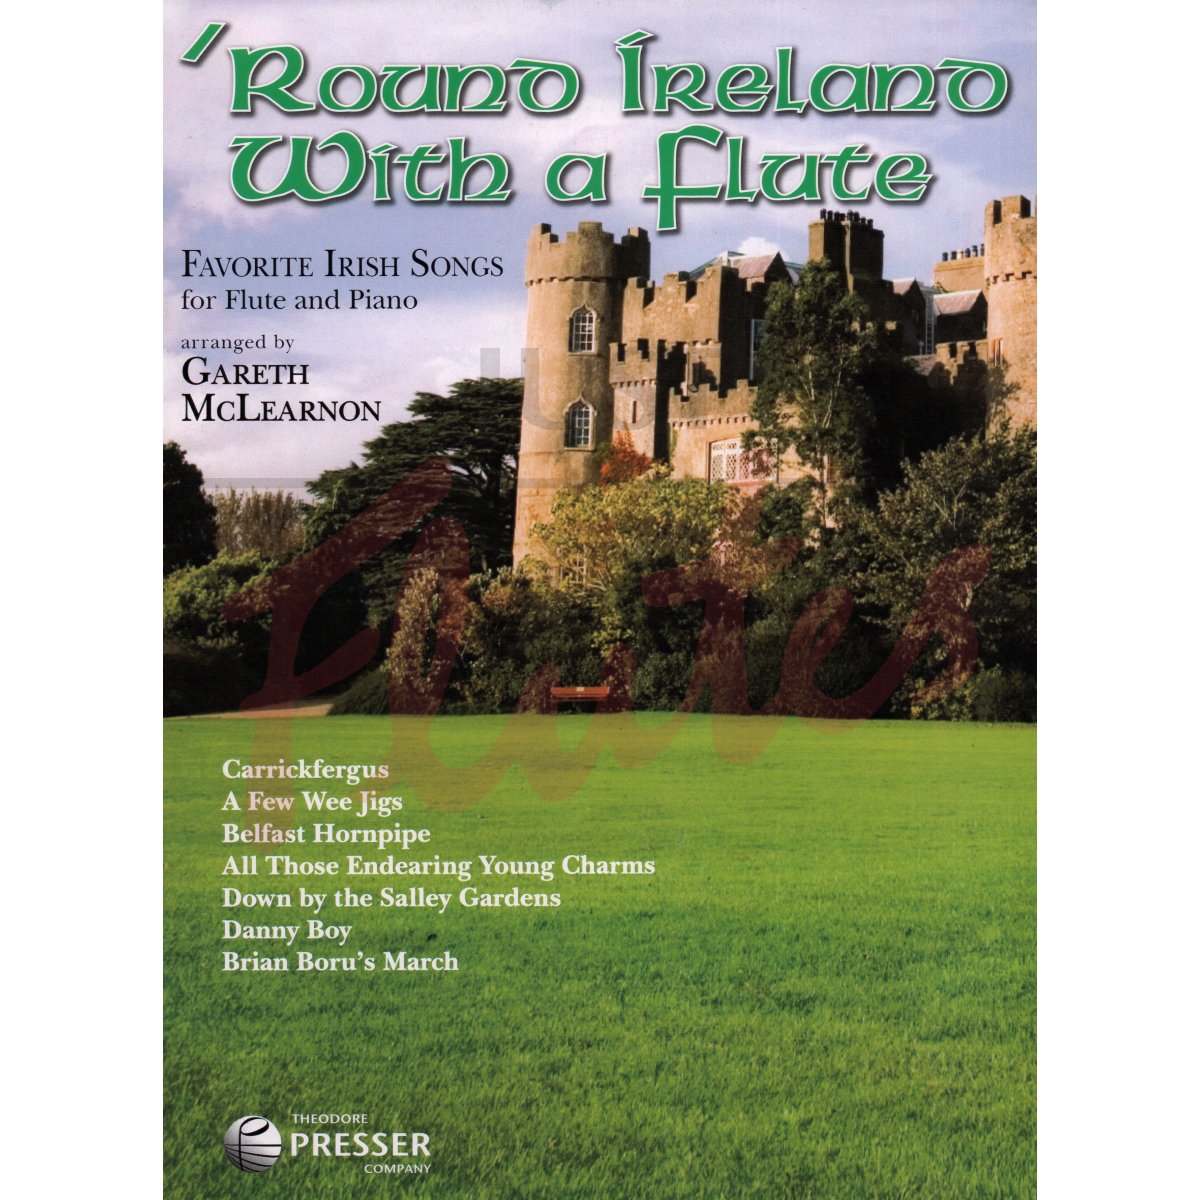 &#039;Round Ireland with a Flute: Favourite Irish Songs for Flute and Piano